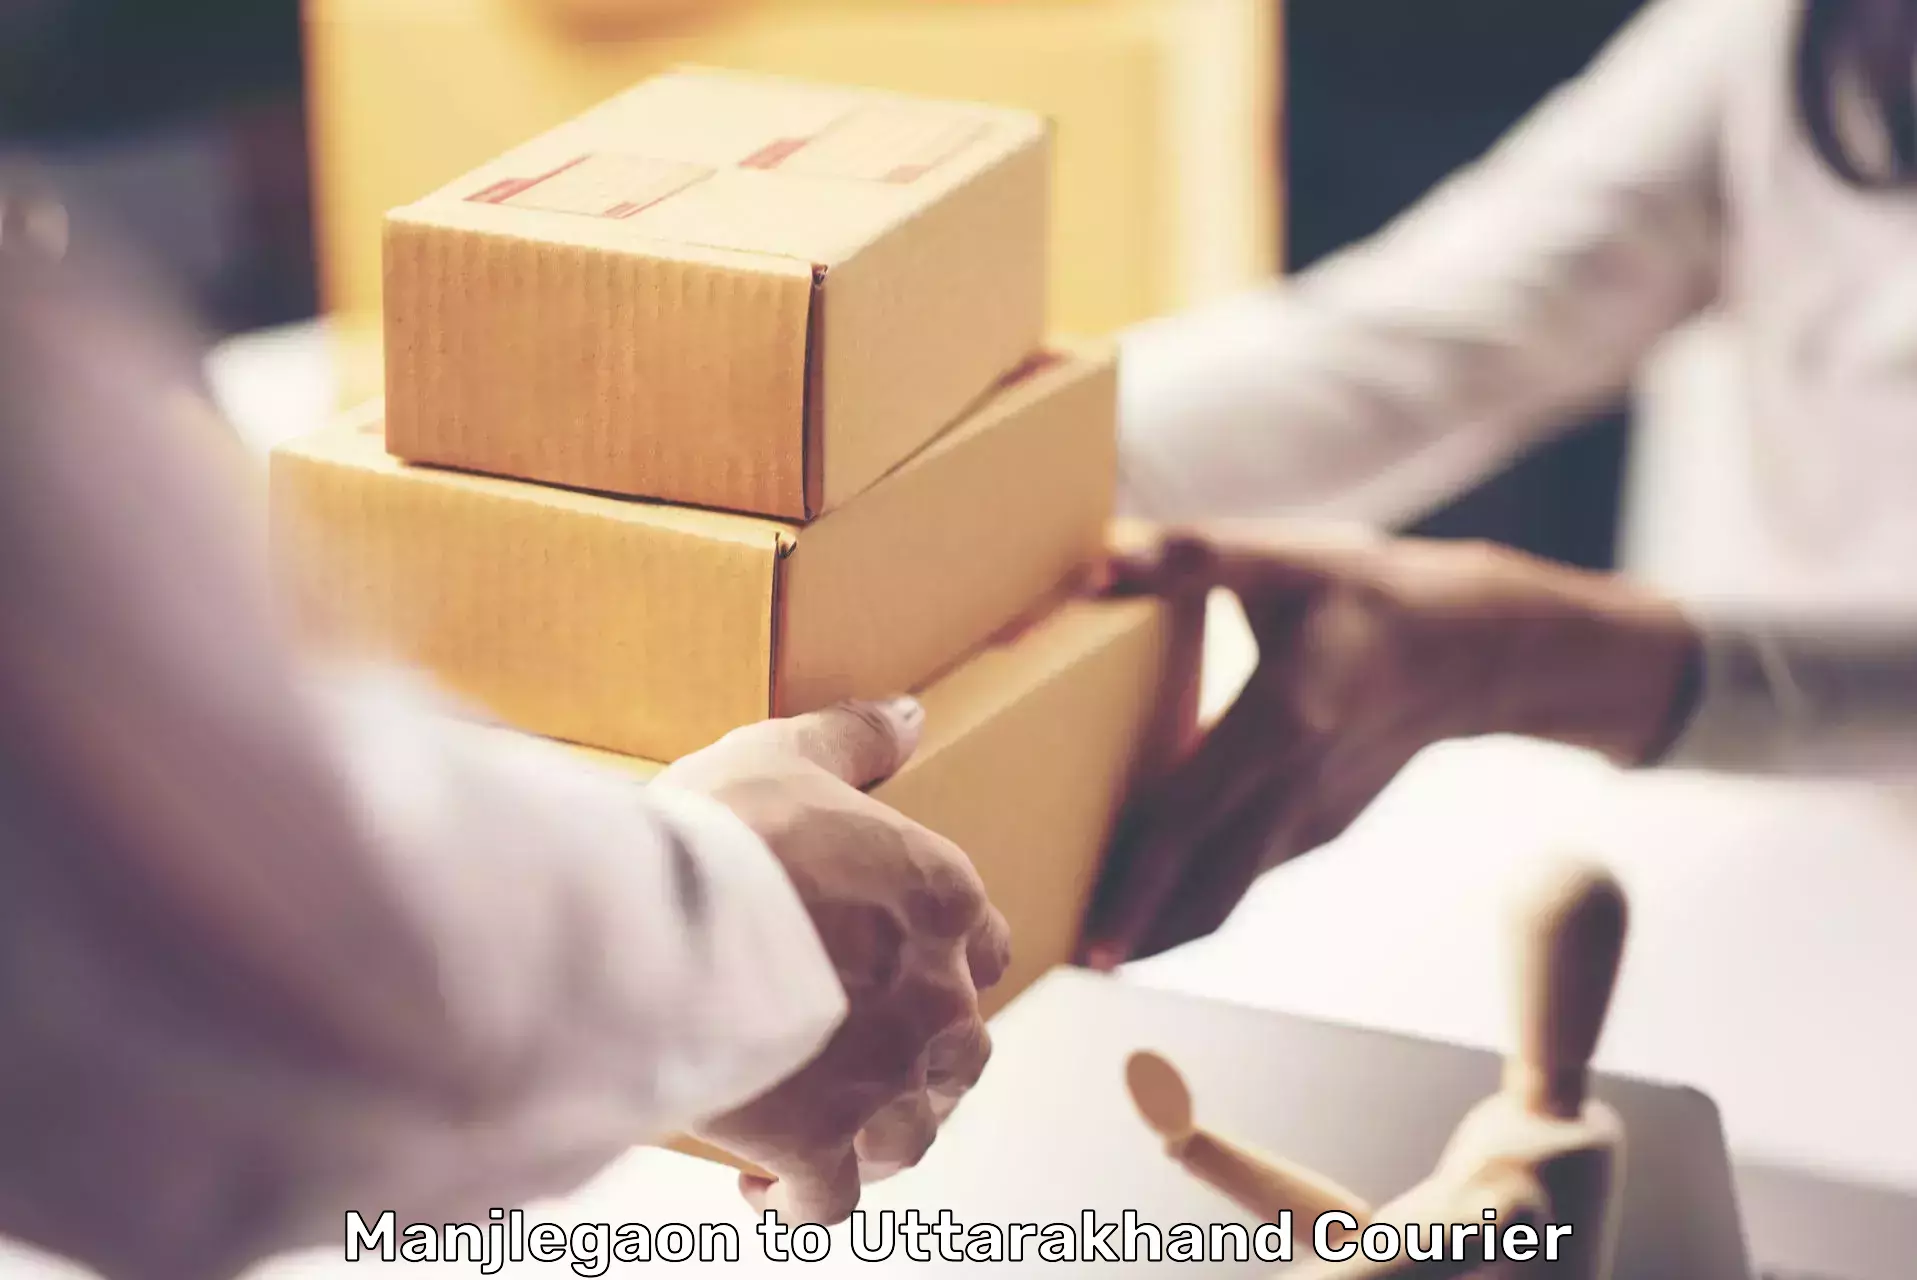 Cost-effective courier options Manjlegaon to Bhagwanpur